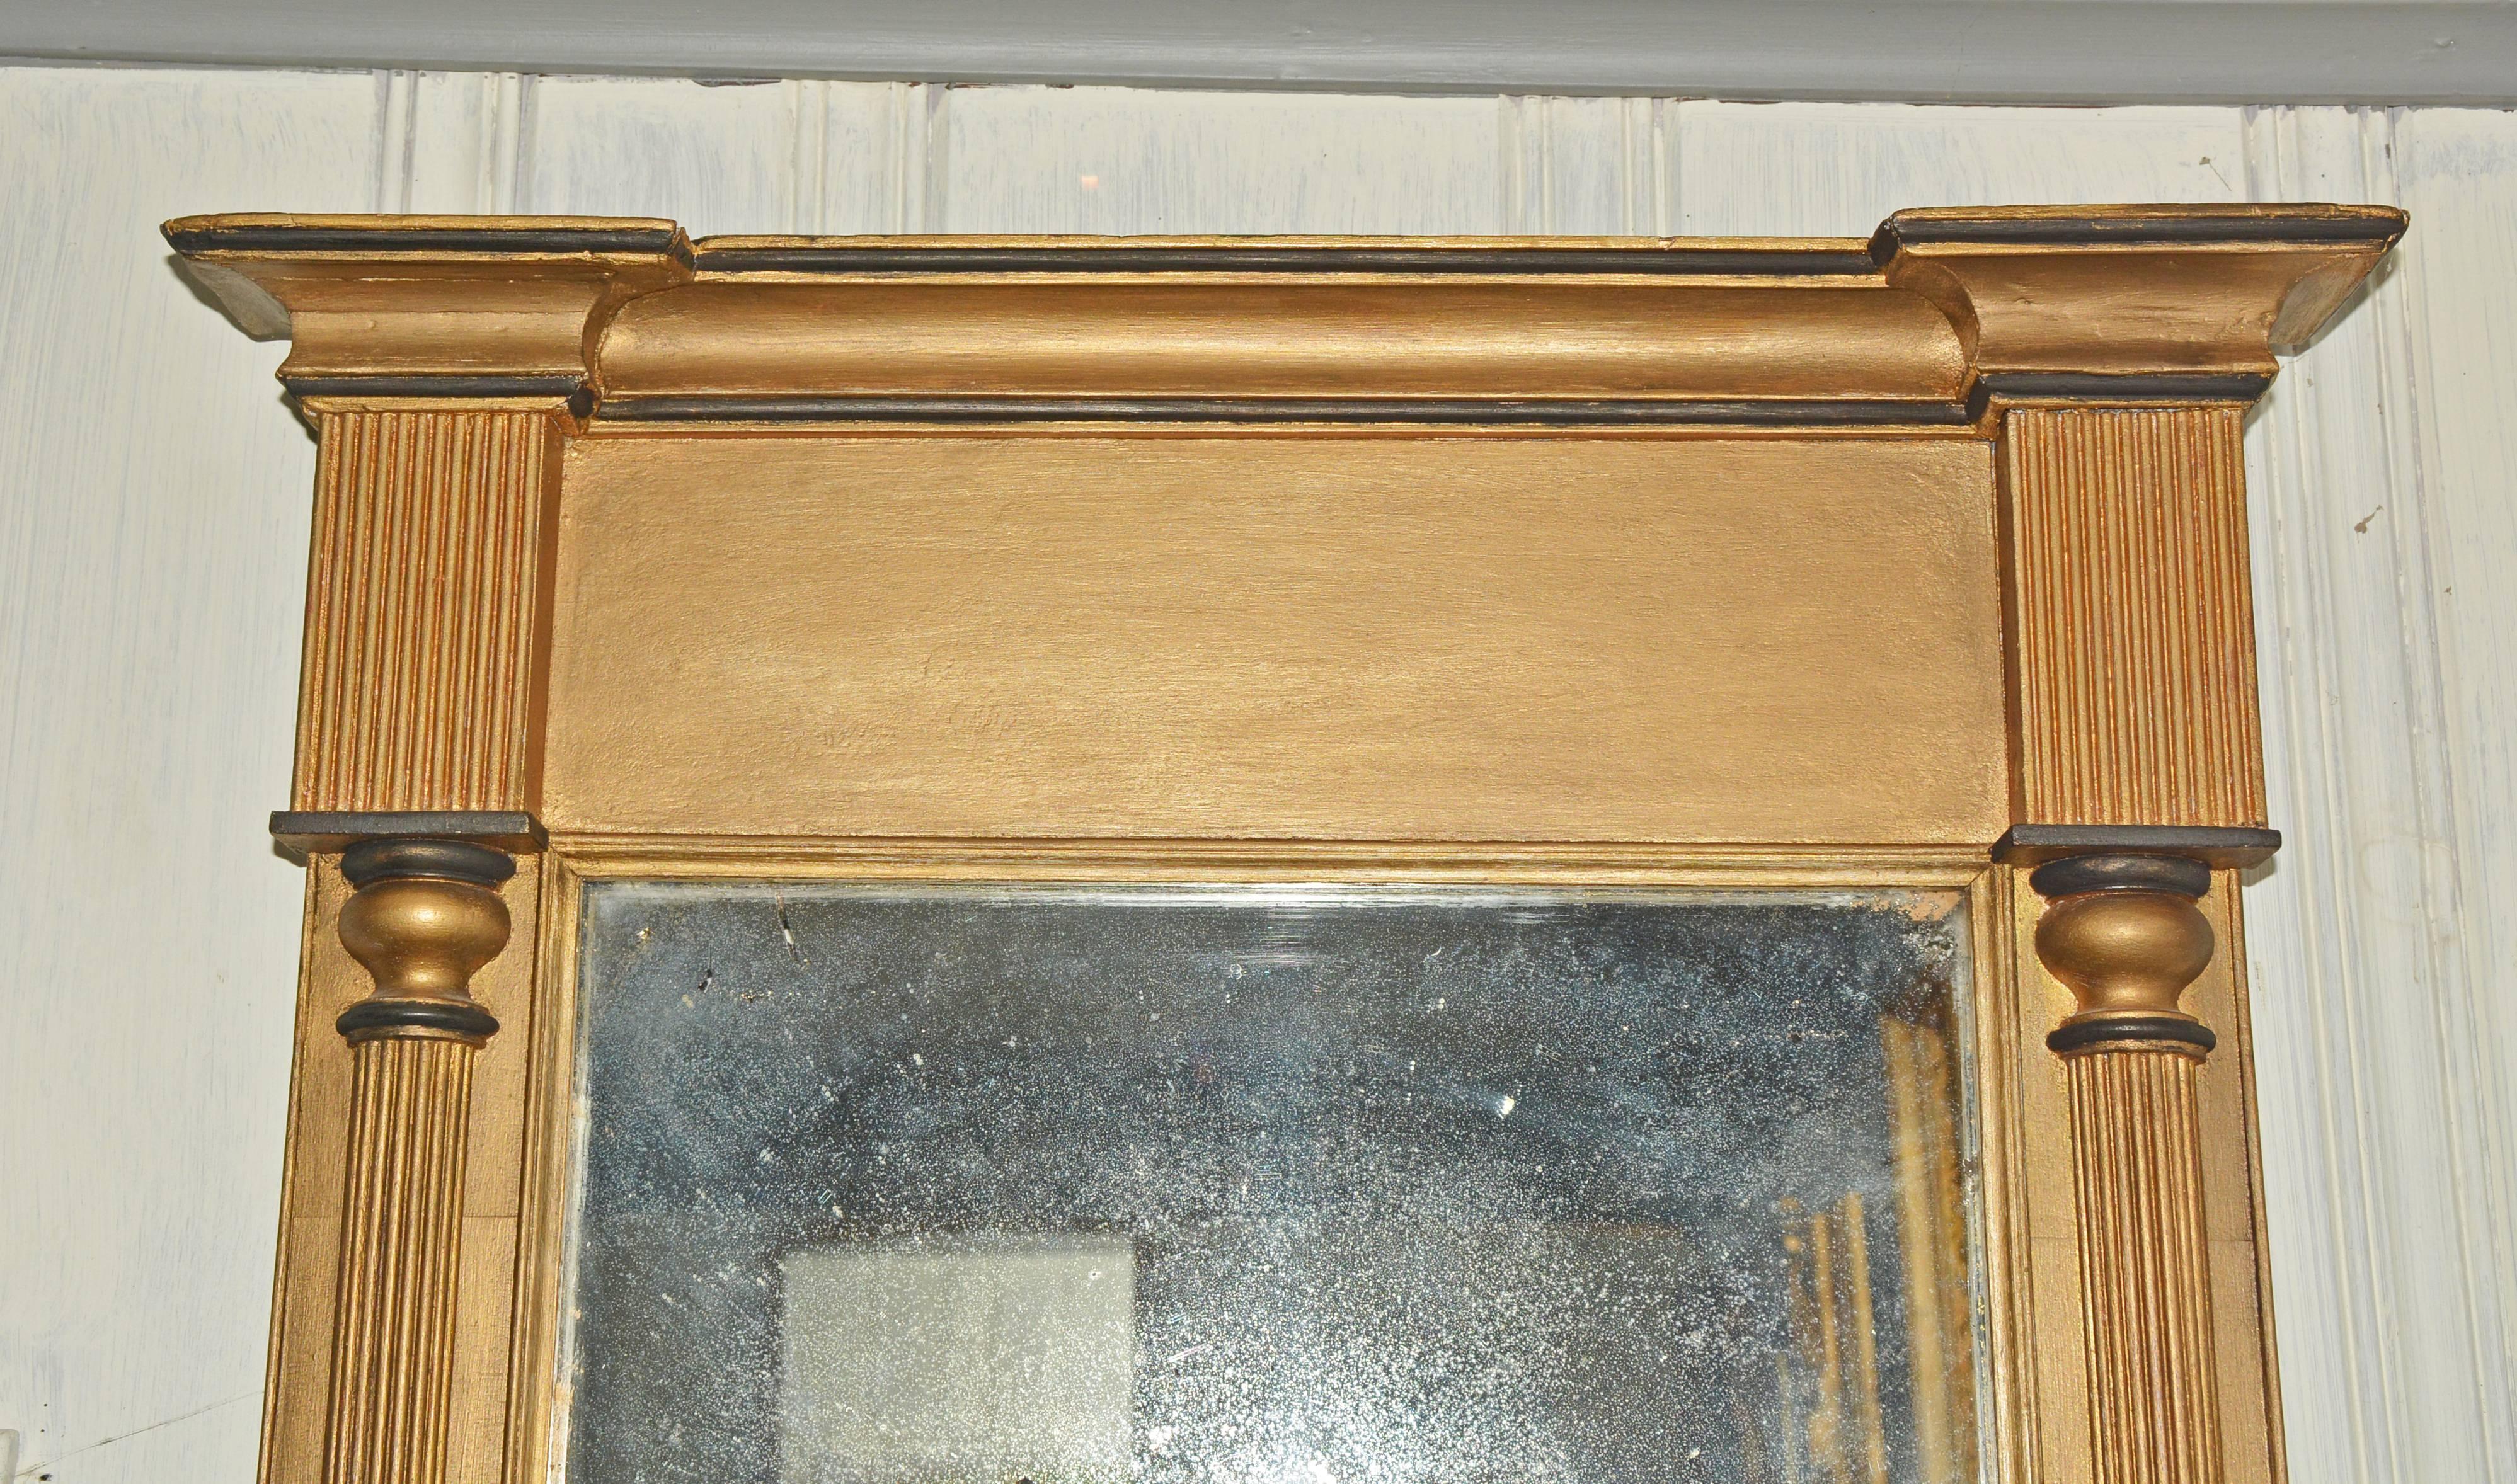 The Federal-style gilded pier mirror features side embellishments of tapered rope-style pilasters topped by fluted pilasters and an overhanging cornice. The mirror is wired for hanging.
 